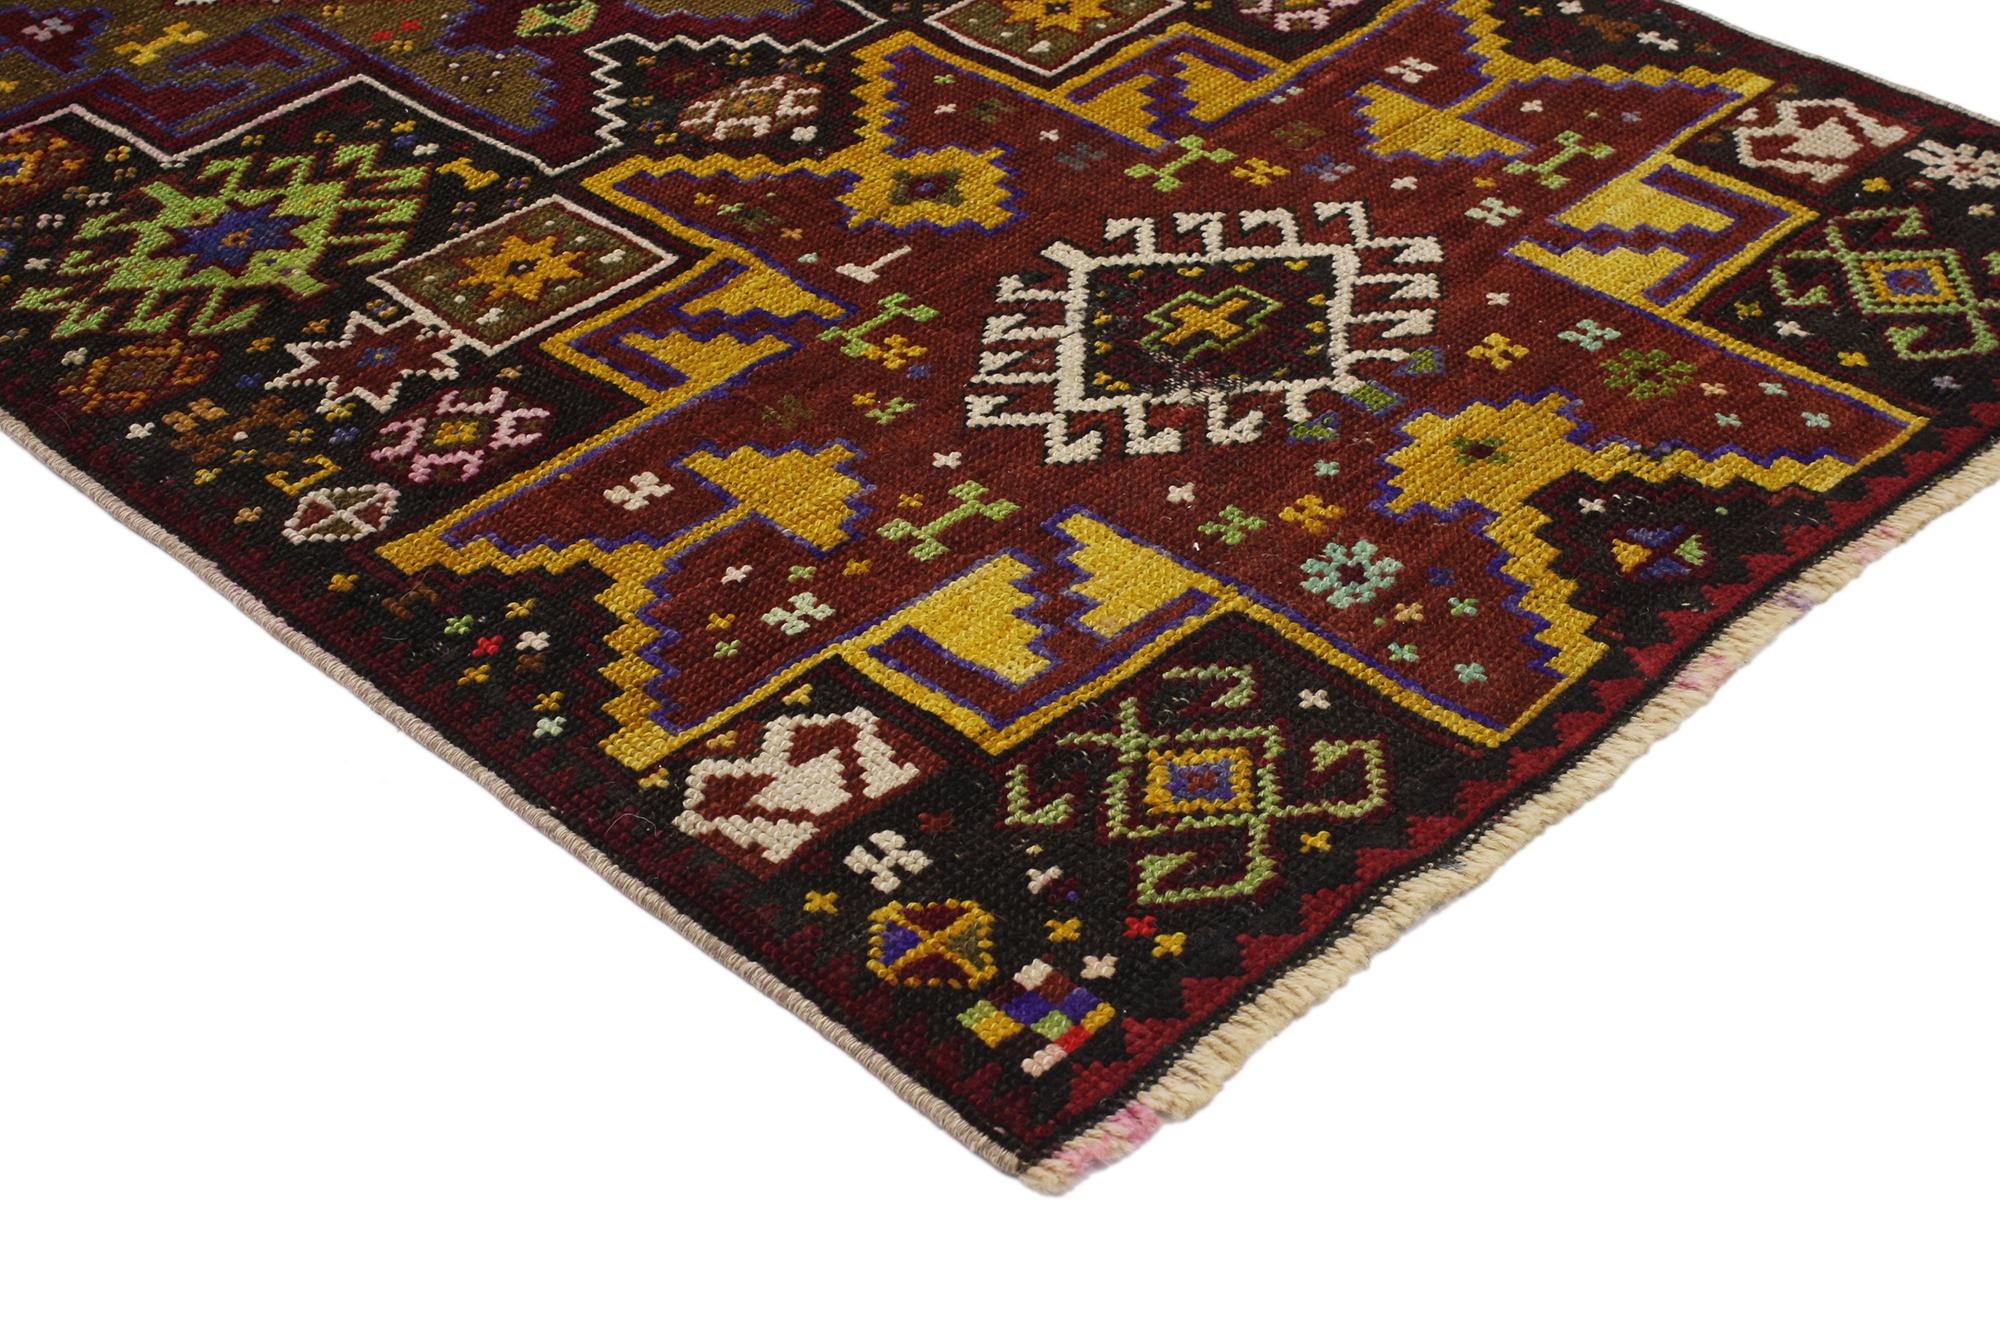 51764, Vintage Turkish Oushak rug with Bohemian Tribal Style 02'06 x 03'11. This hand-knotted wool vintage Turkish Oushak rug features a modern traditional style. Immersed in Anatolian history and refined colors, this vintage Oushak rug combines